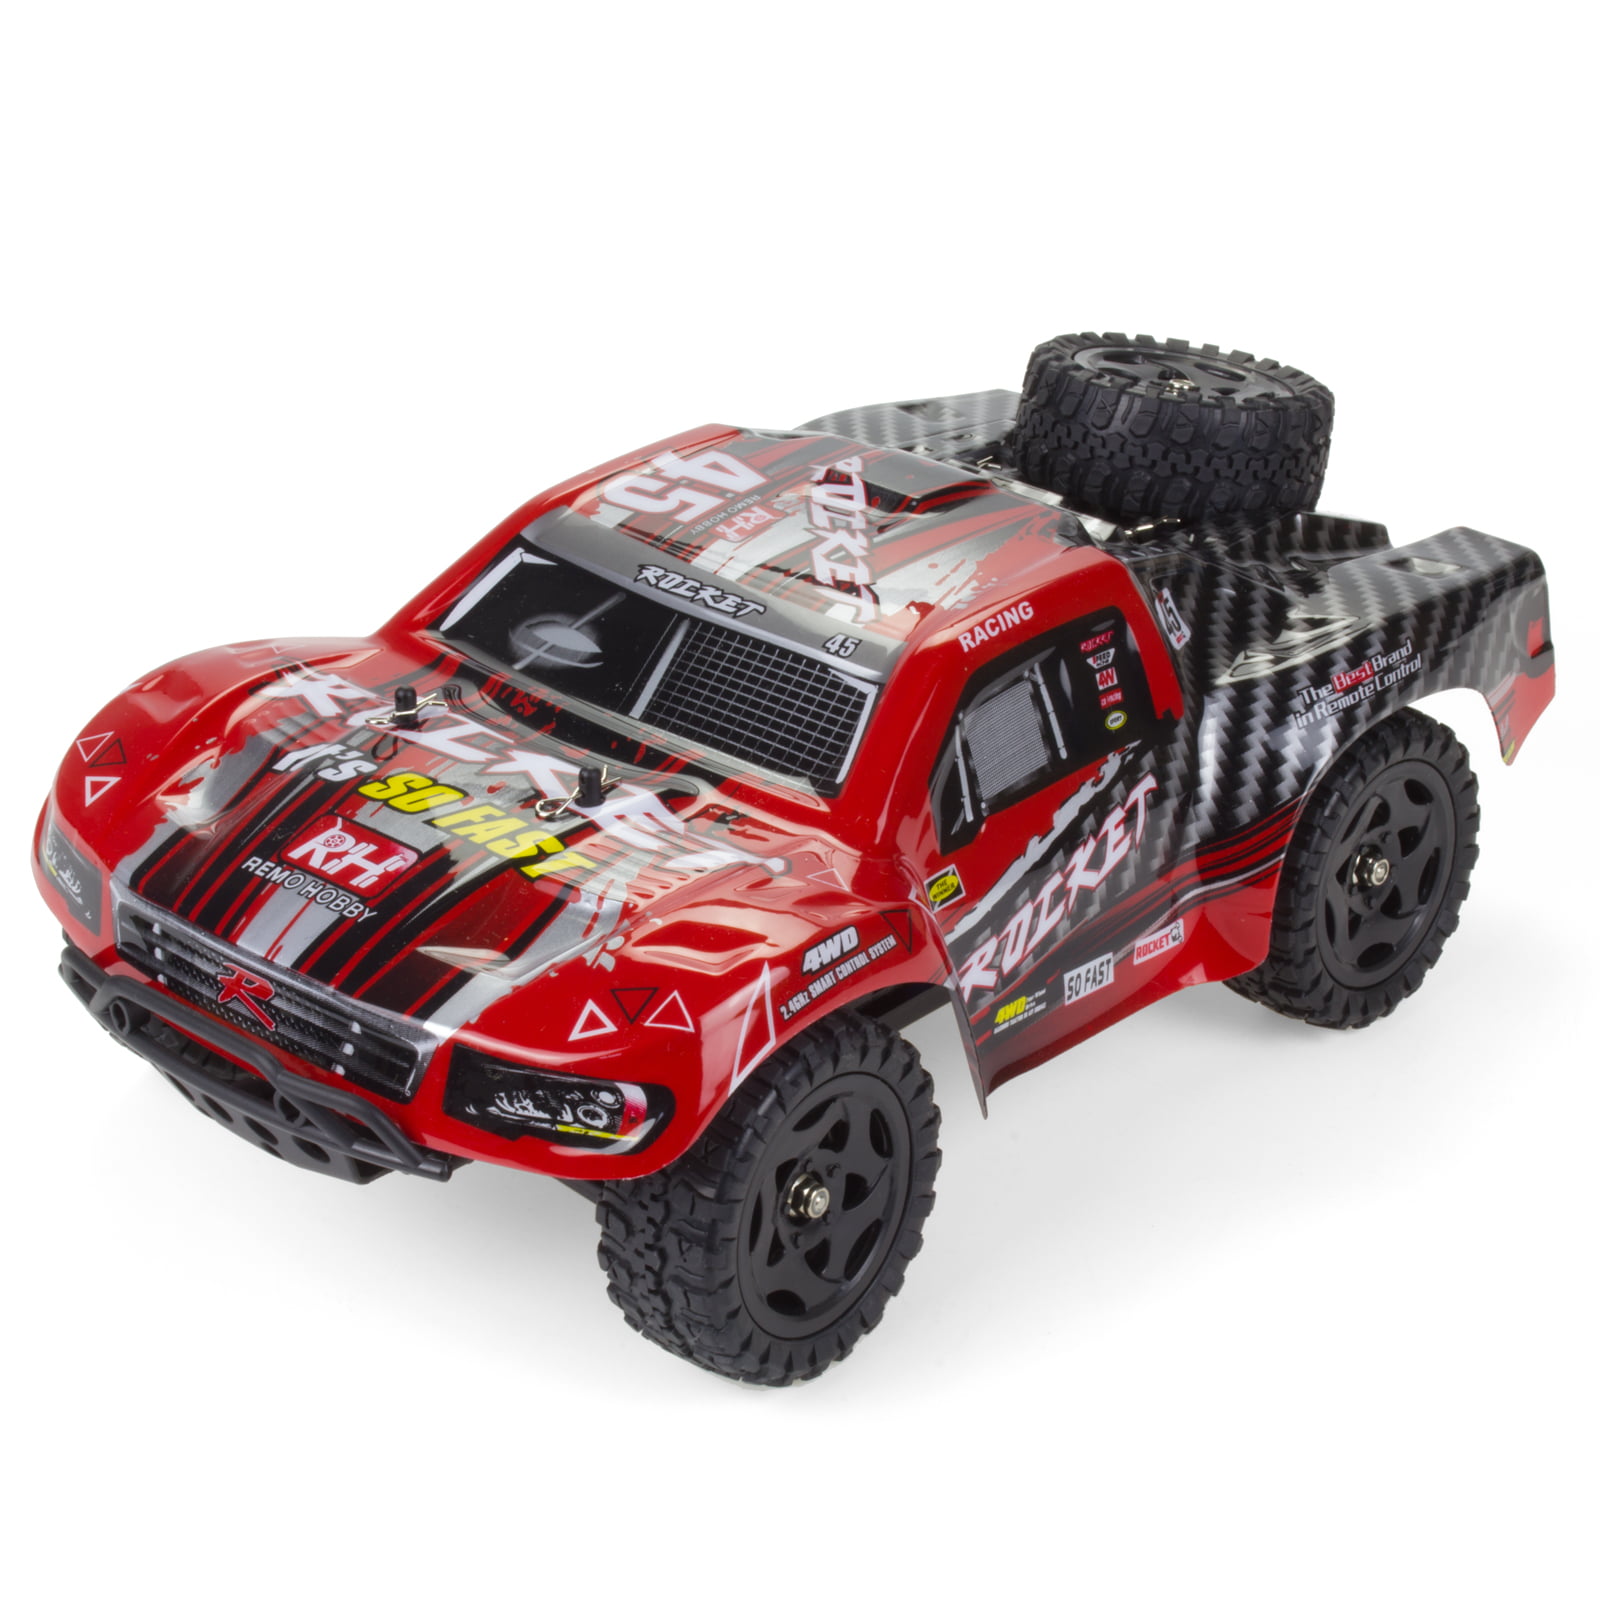 REMO 1621 1/16 RC Truck Car 50KM/h 2.4G 4WD Waterproof Brushed Short Course SUV 